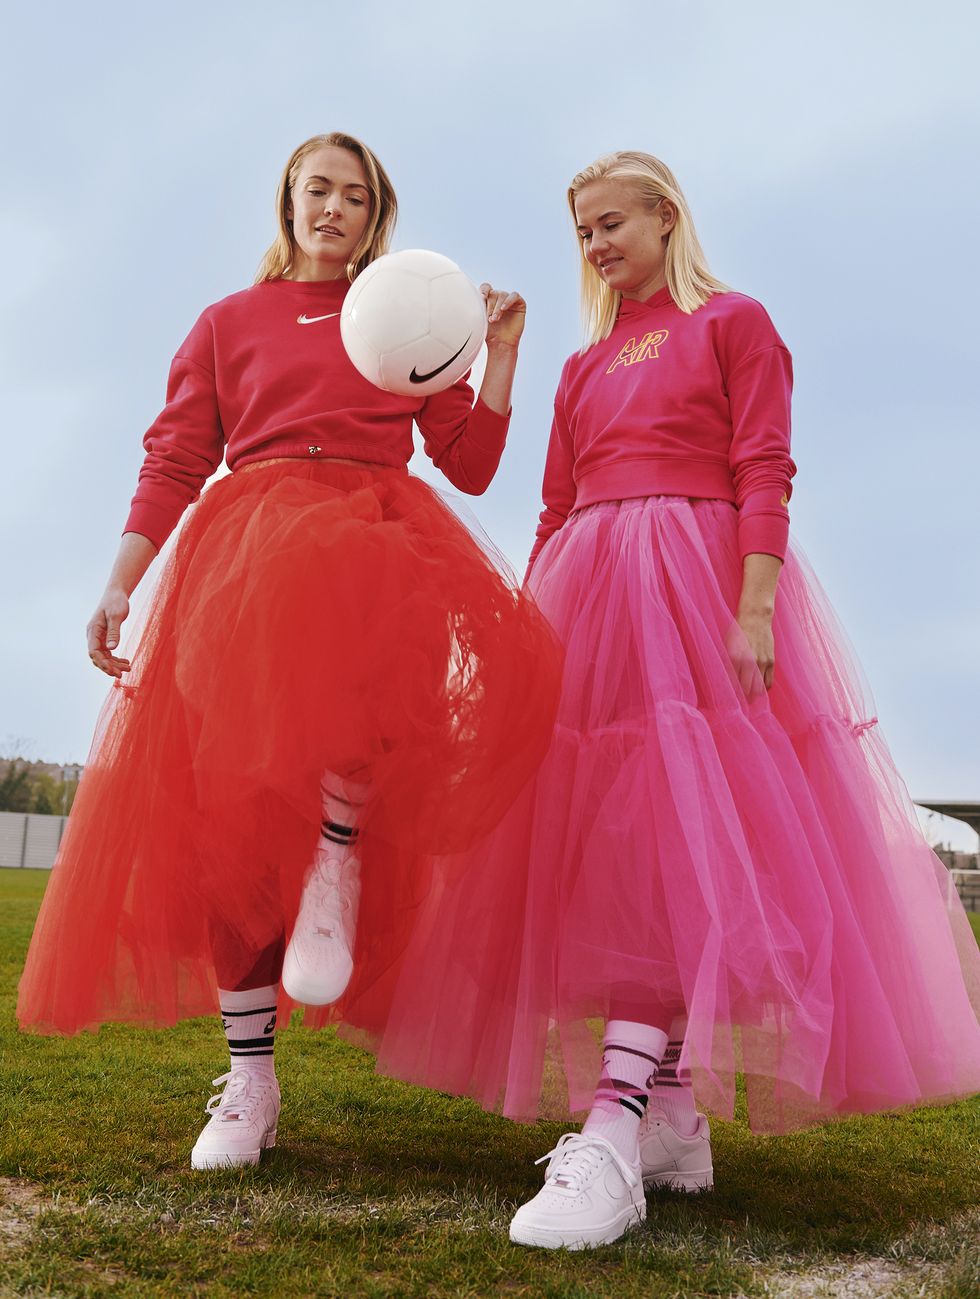 nike athletes and professional footballers magdalena eriksson and pernille harder